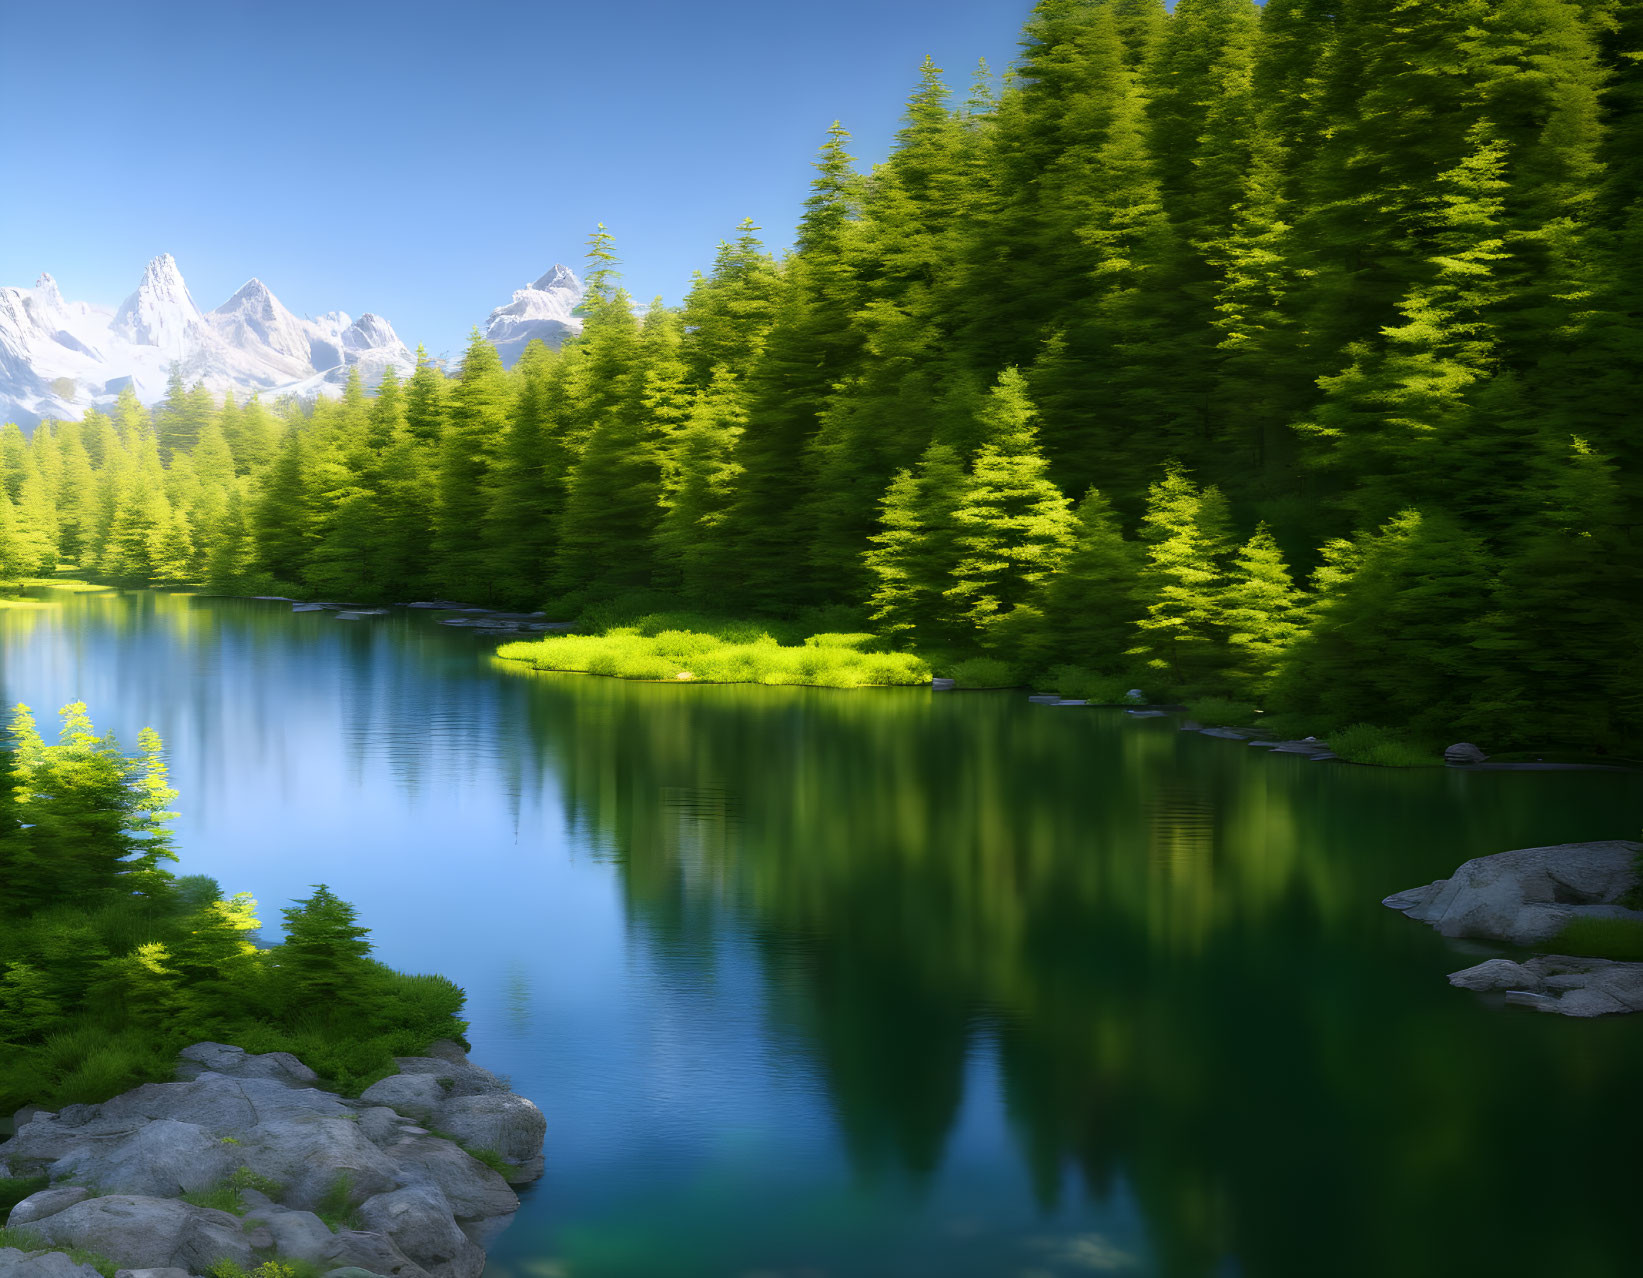 Tranquil mountain lake with pine trees and blue sky